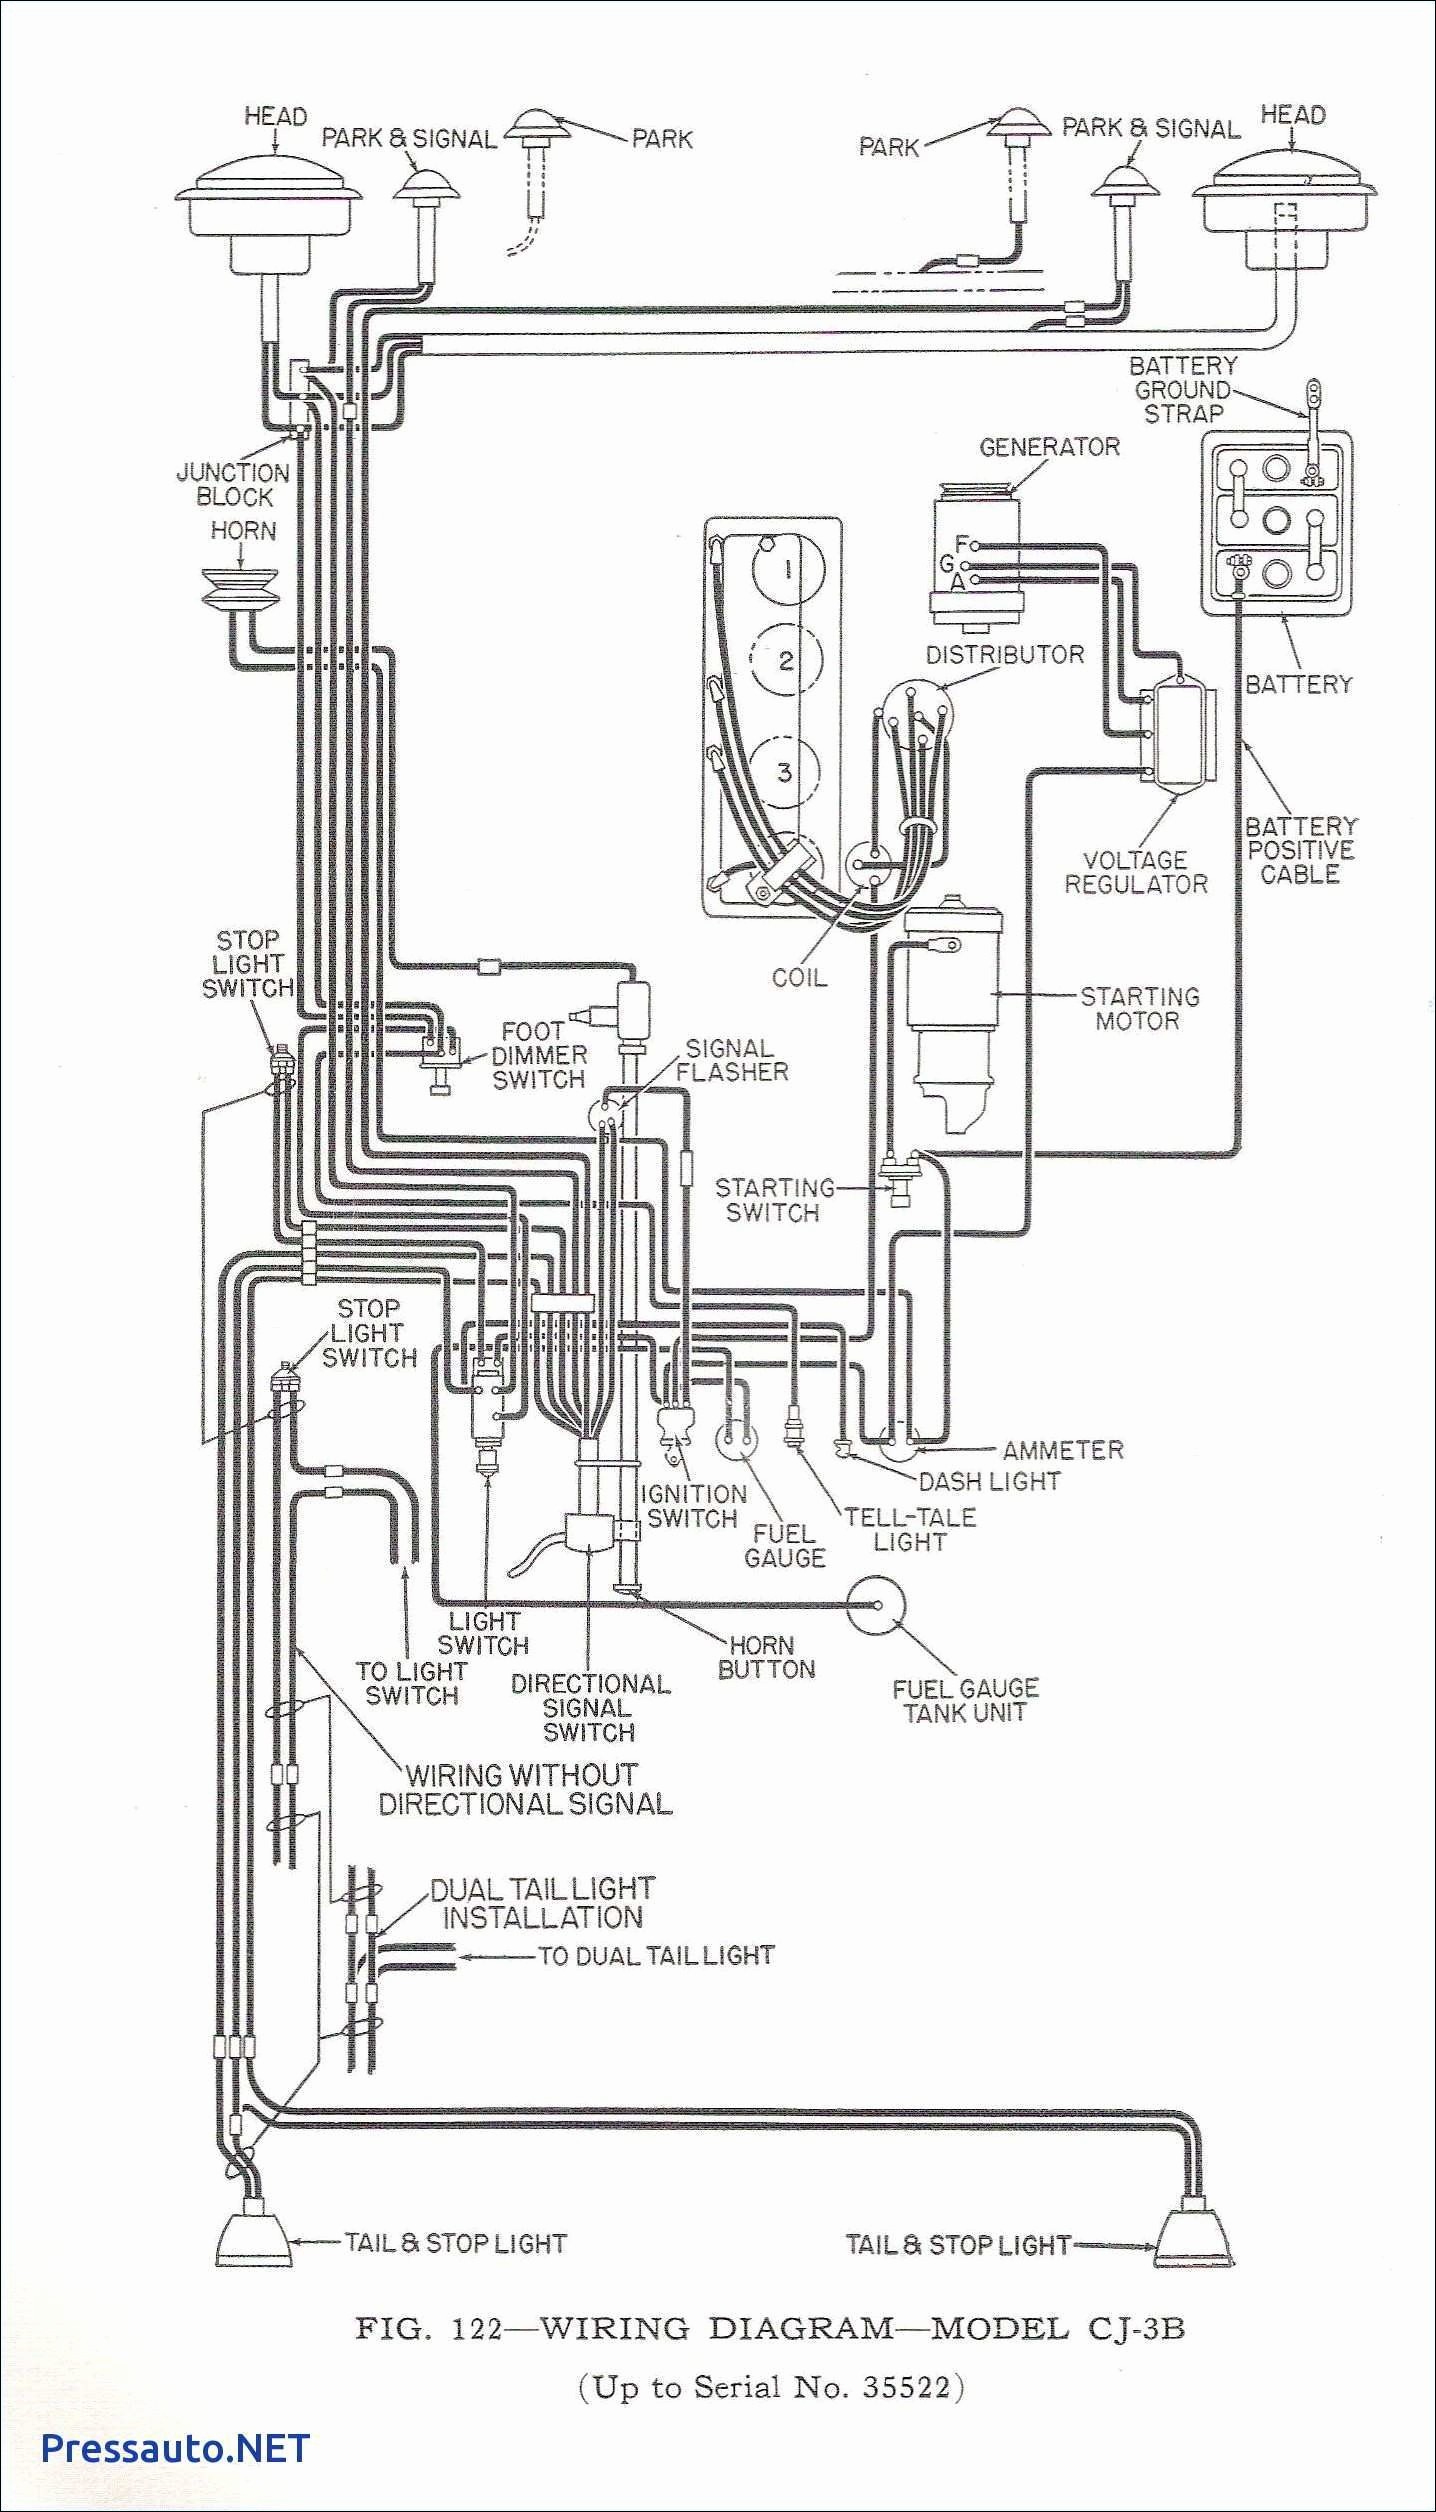 Dimming Switch Wiring Diagram Inspirational Nice How to Install A Dimmer Switch A Double Switch Motif